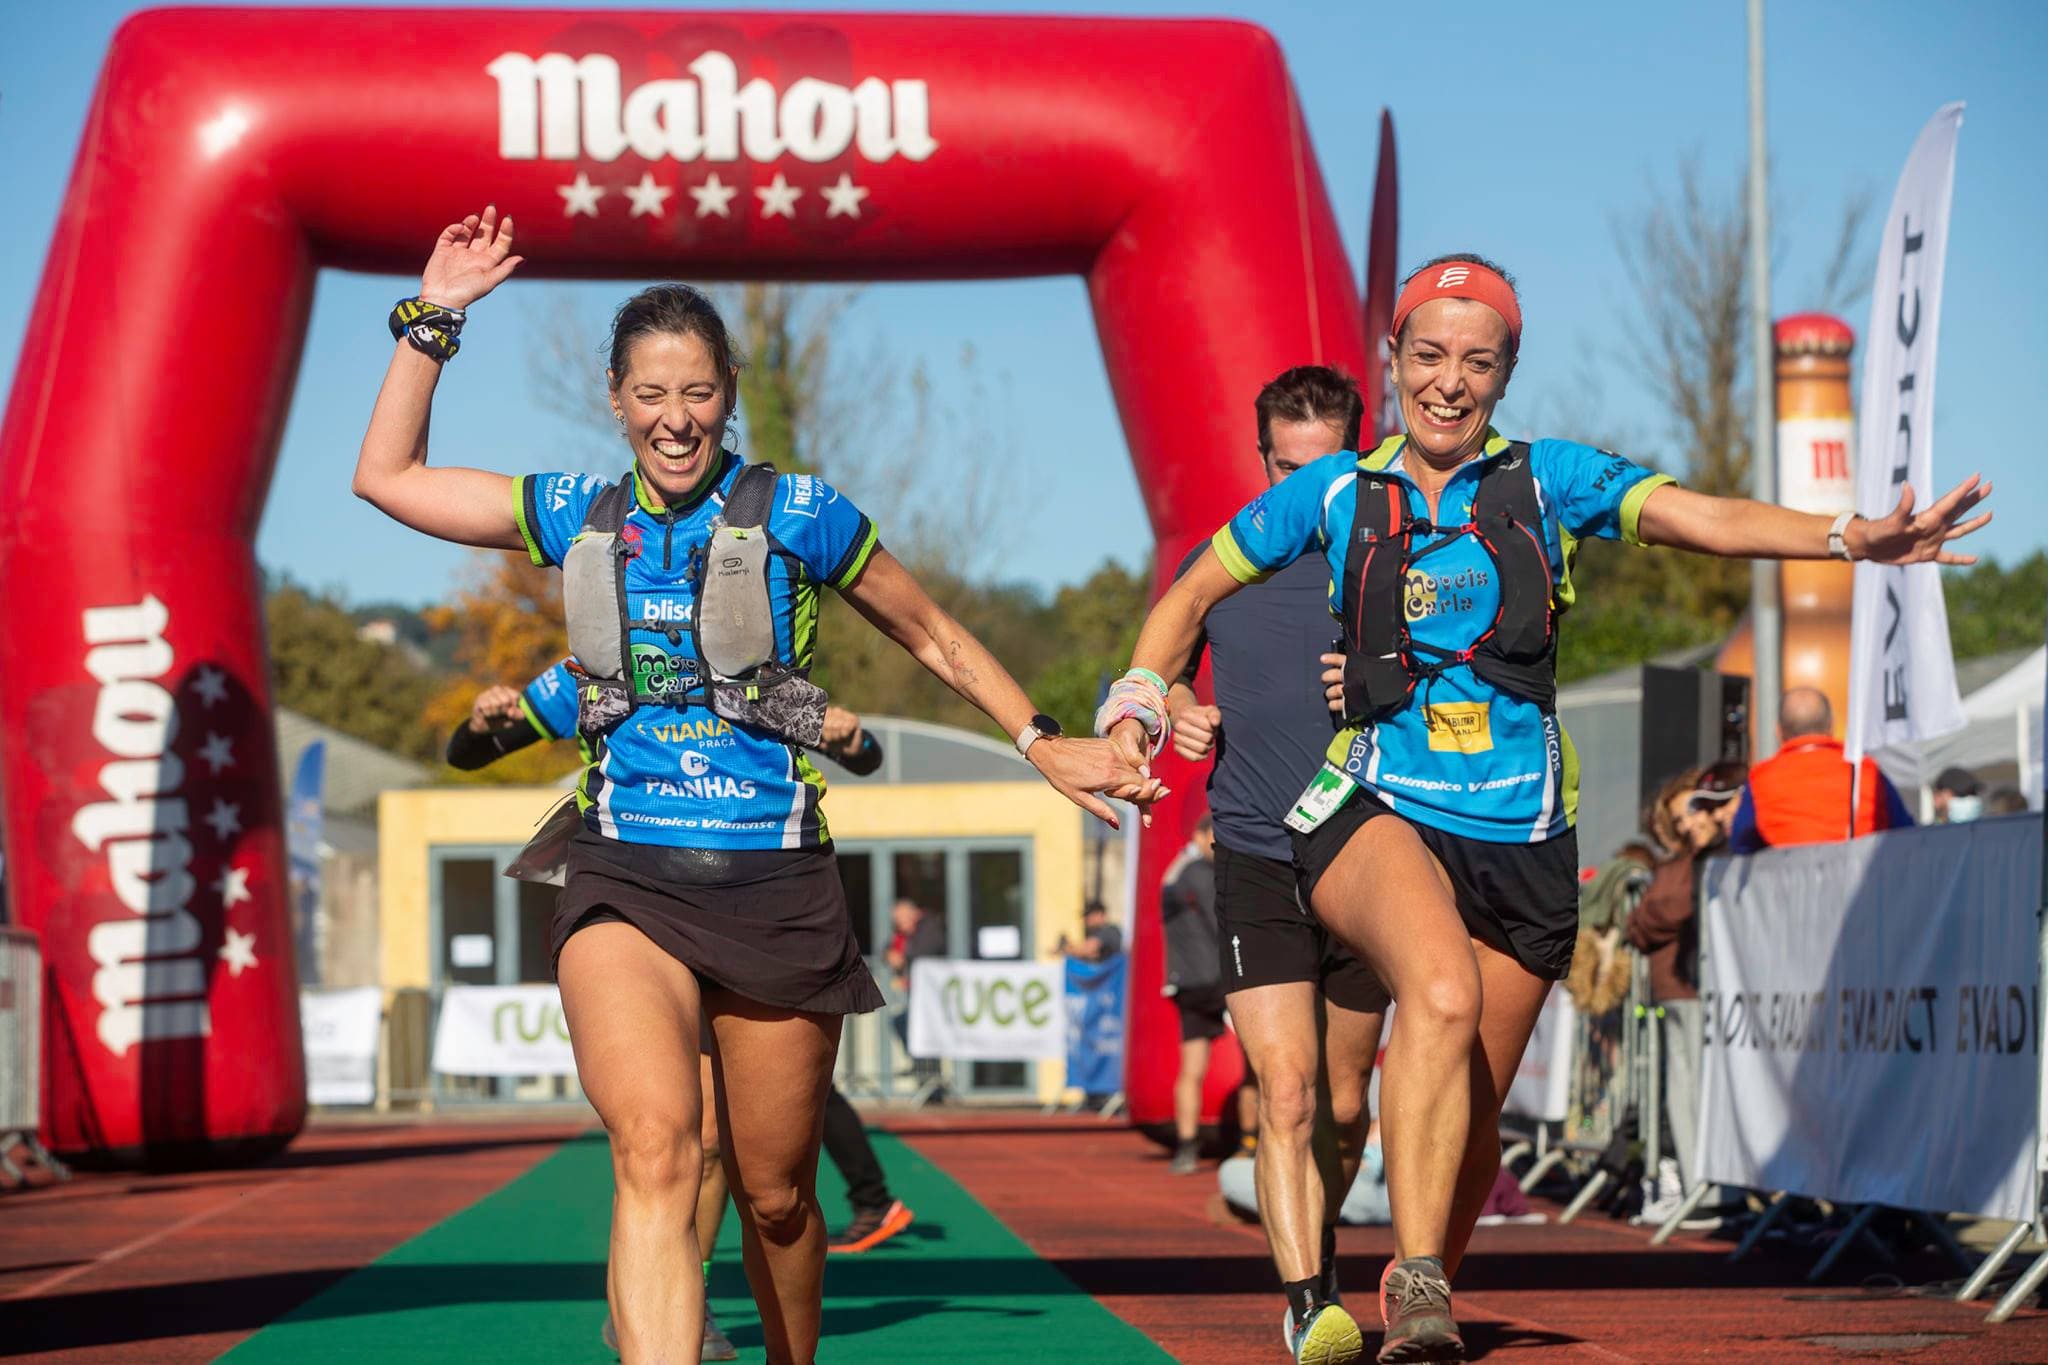 Two women Finisher in a trail running race holding each other hands